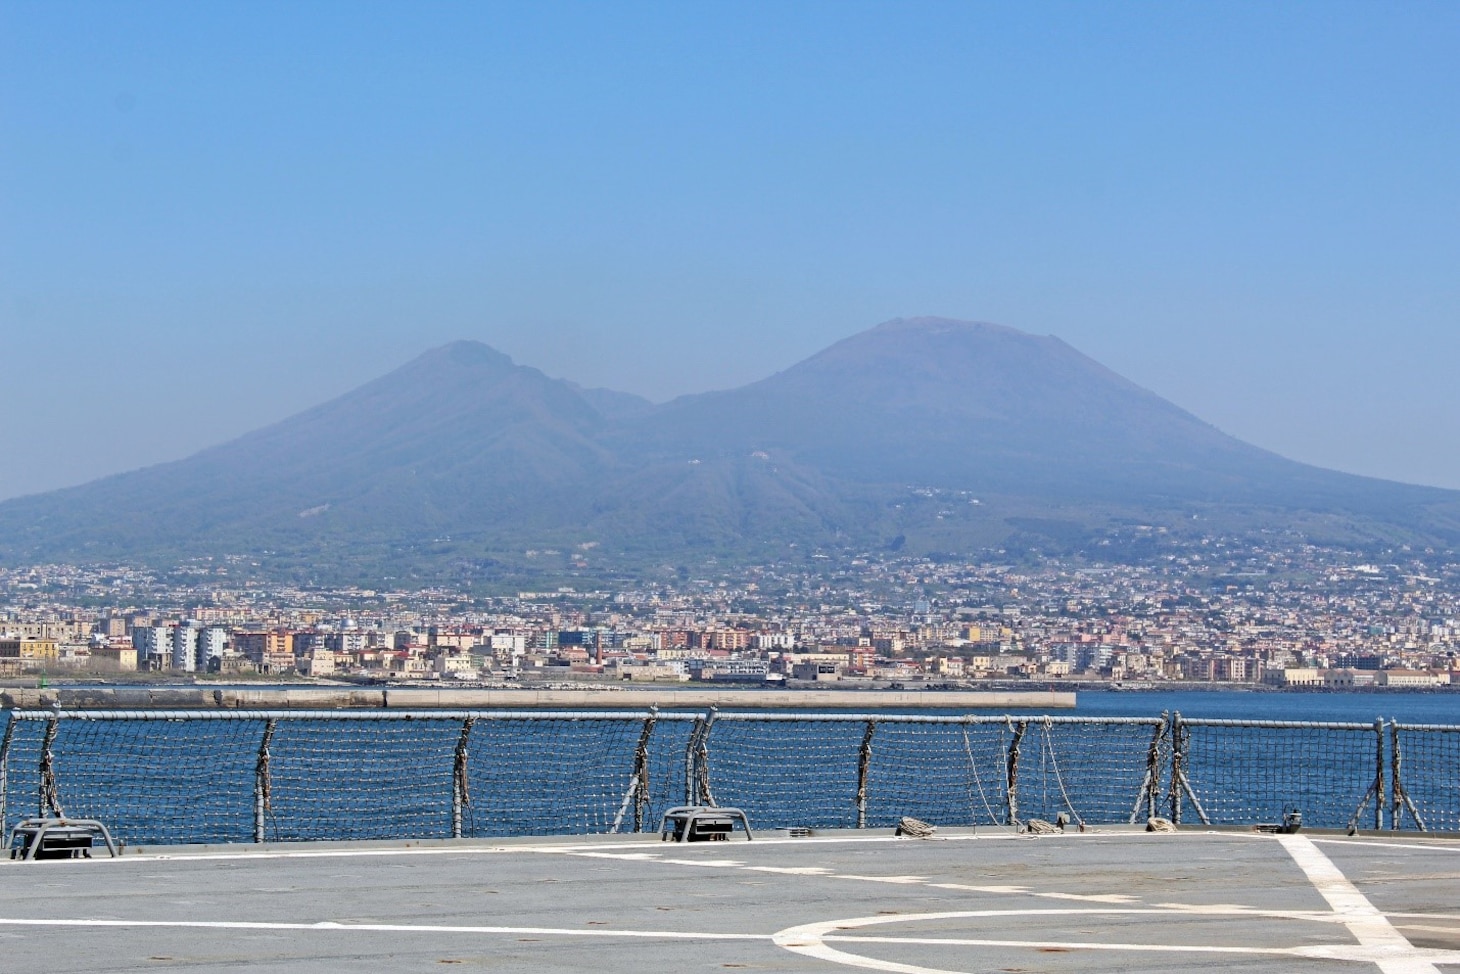 240407-N-JC445-1003 NAPLES, Italy (April 7, 2024) A photo of Mount Vesuvius as the Blue Ridge-class command and control ship USS Mount Whitney (LCC 20) arrives in Naples, Italy. Mount Whitney, the U.S. Sixth Fleet flagship, is on a scheduled port visit to participate in the 75th anniversary of the NATO Alliance and enhance U.S.-Italian relations. Homeported in Gaeta, Mount Whitney operates with a combined crew of U.S. Sailors and Military Sealift Command civil service members. (U.S. Navy photo by Mass Communication Specialist 2nd Class Mario Coto)